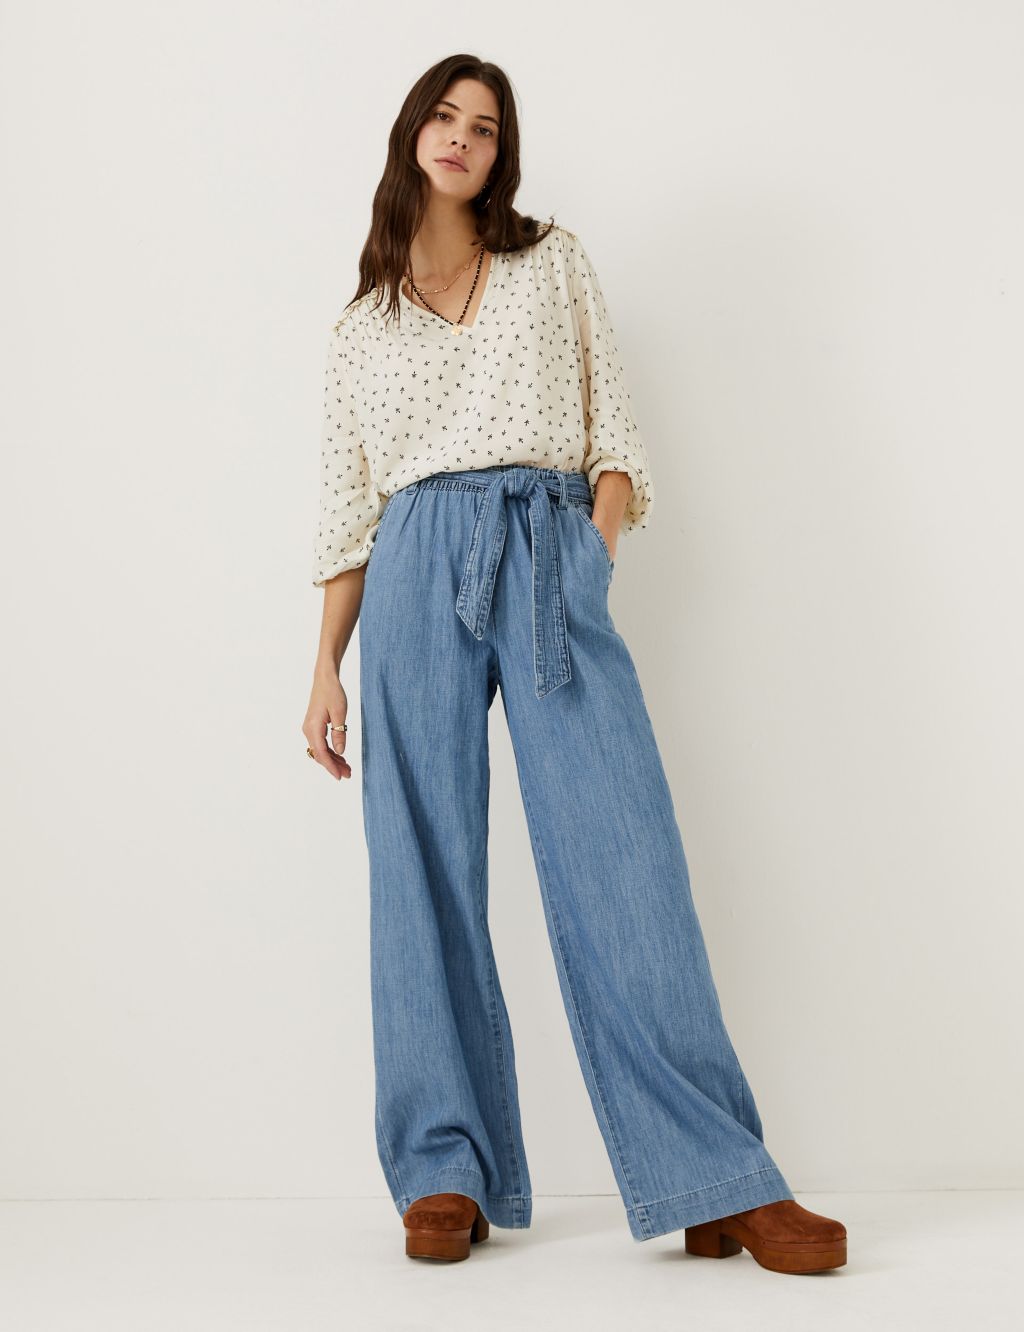 Denim Belted Wide Leg Trousers image 1